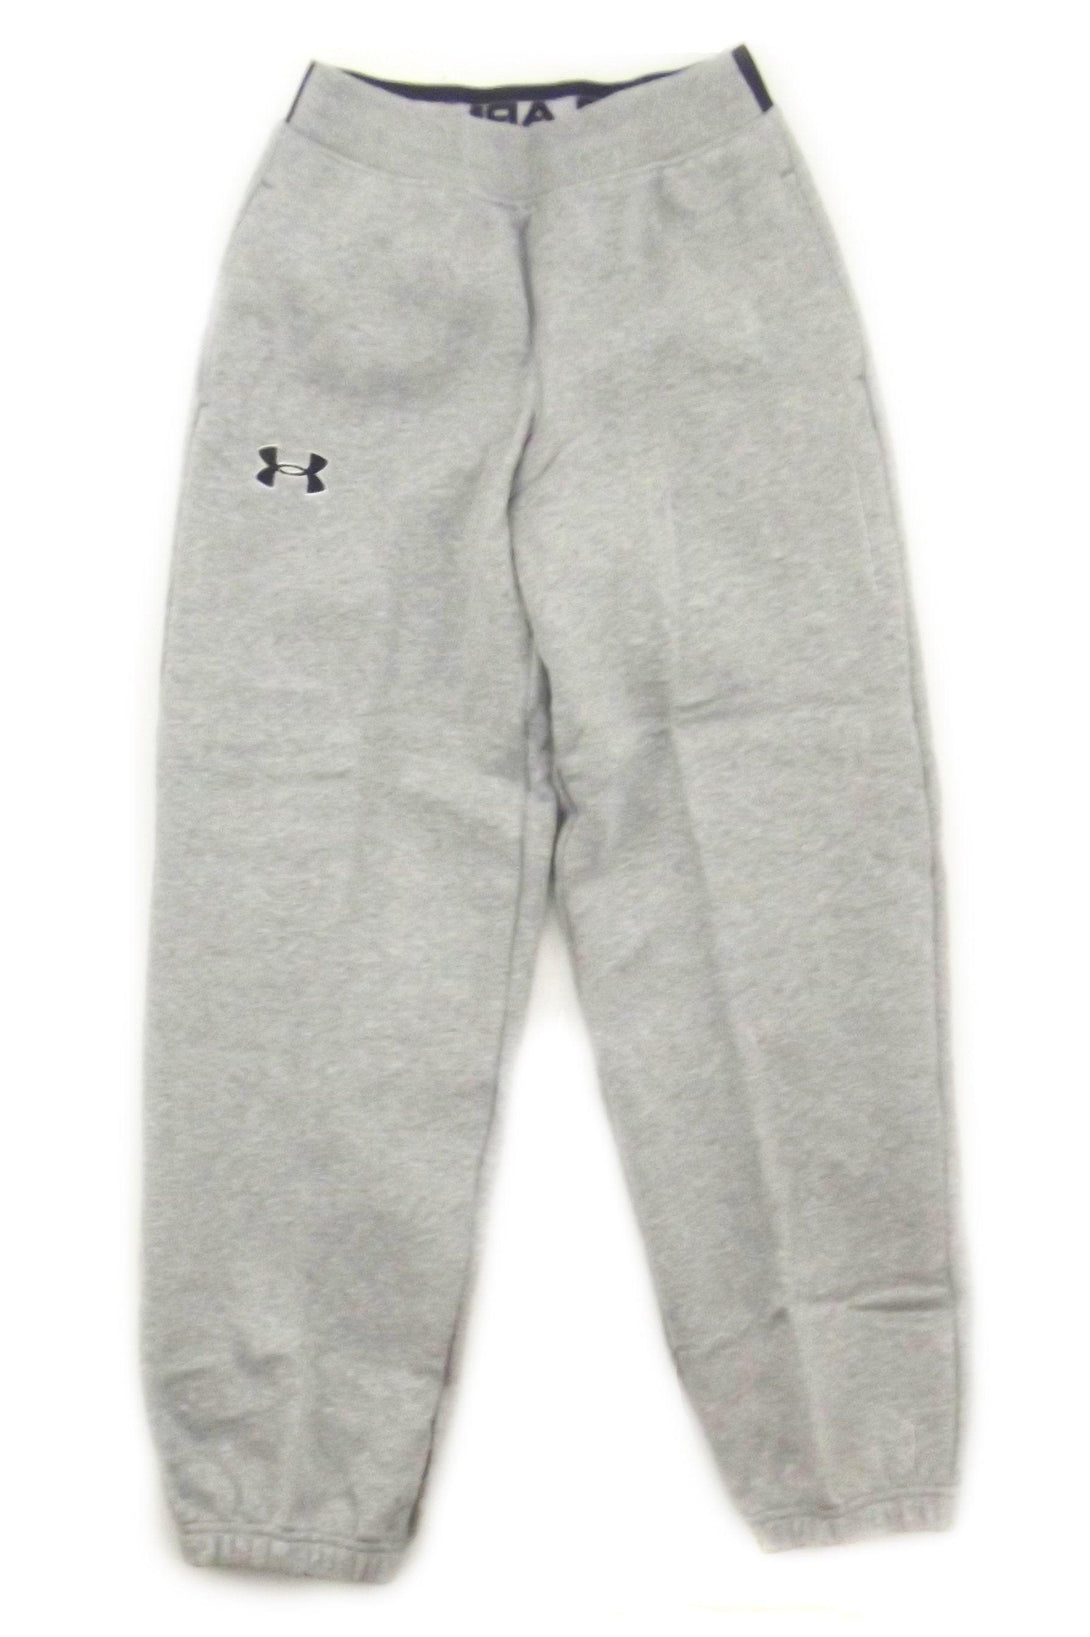 Rugby Heaven Under Armour Transit Kids Grey Pants - www.rugby-heaven.co.uk